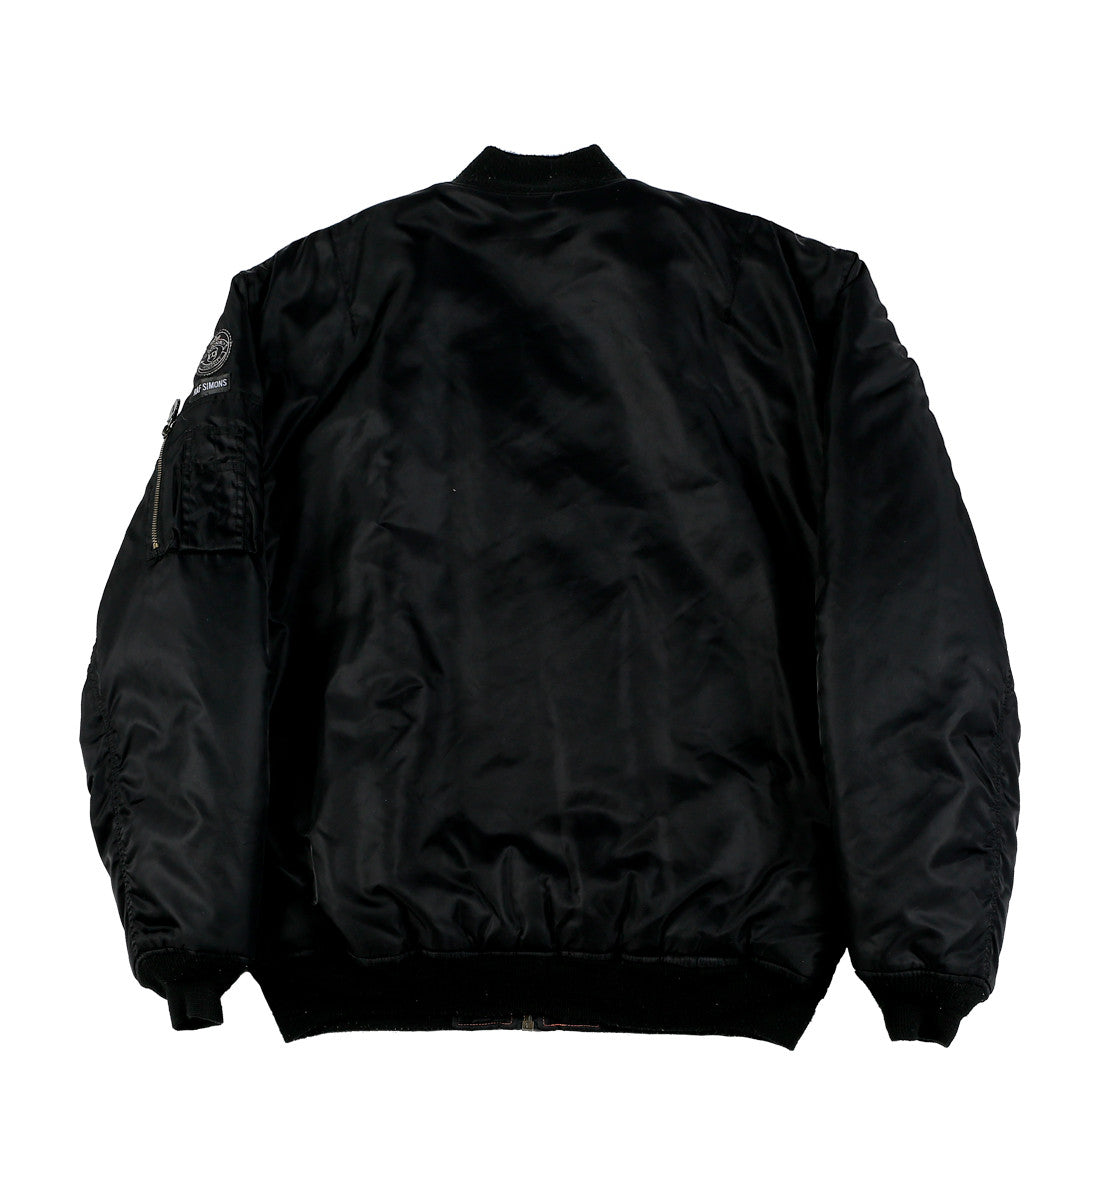 A/W00-01 'Confusion' MA-1 Bomber Jacket by Raf Simons